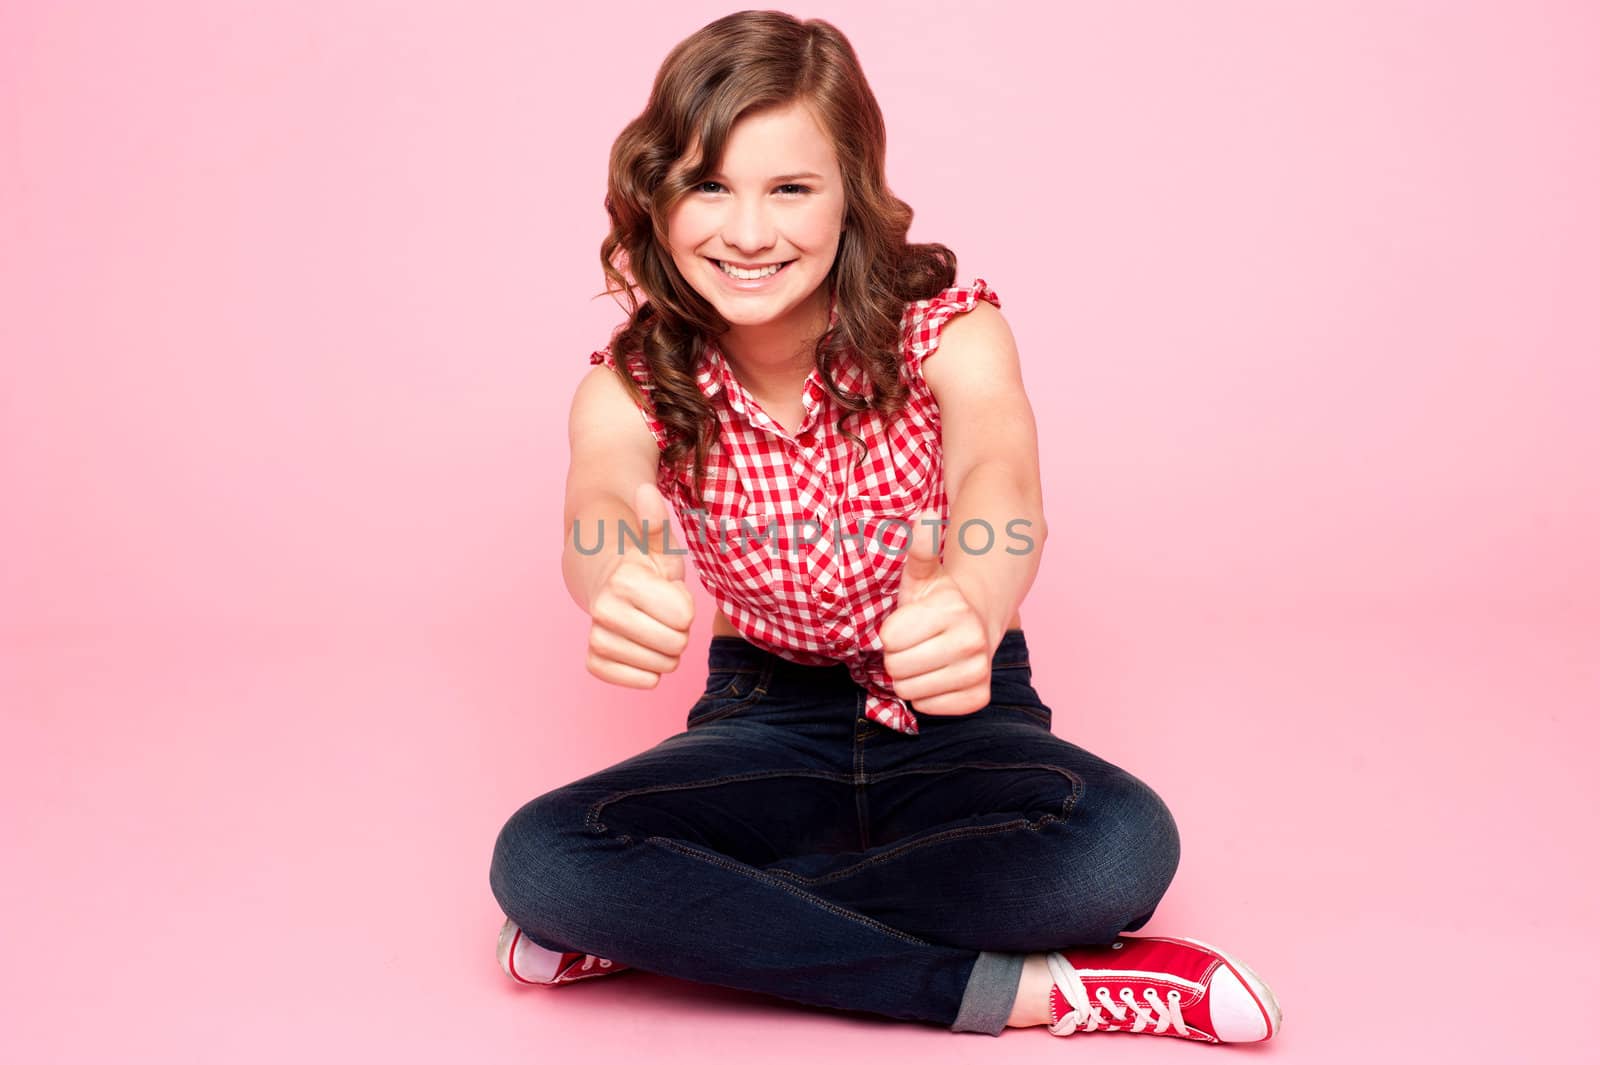 Pretty teenager showing double thumbs up to camera